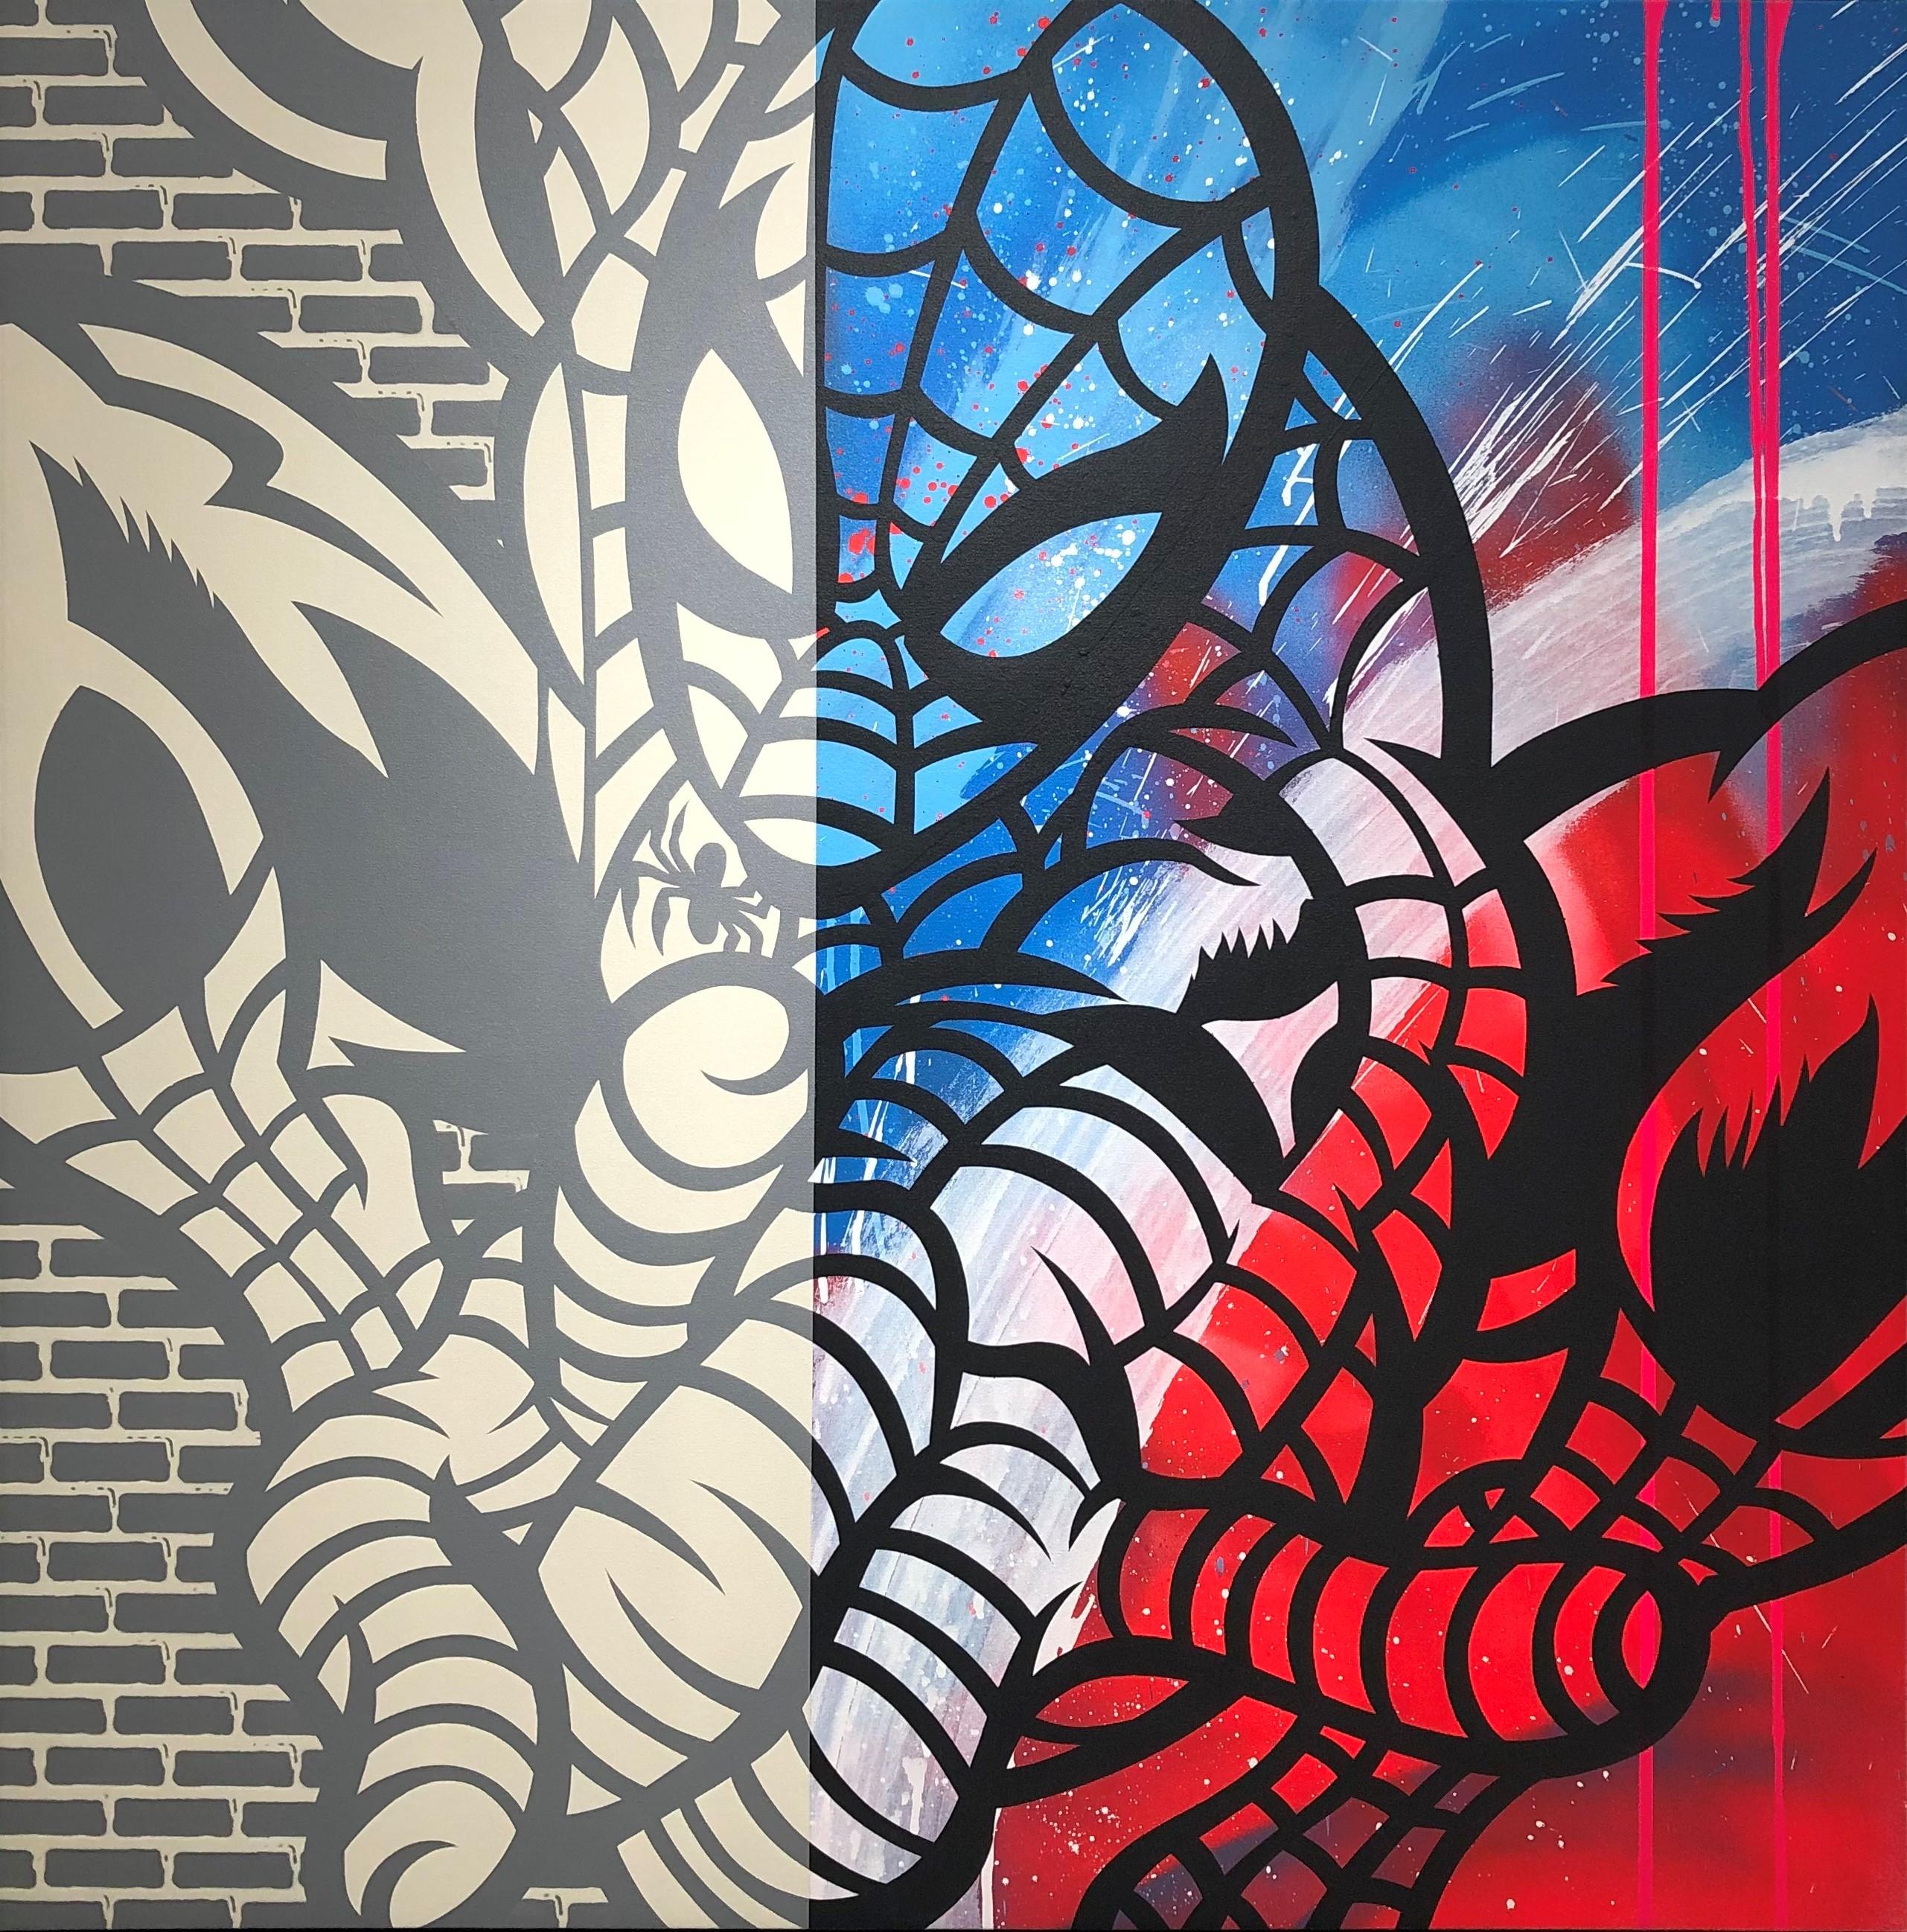 Spiderman - Painting by Seen